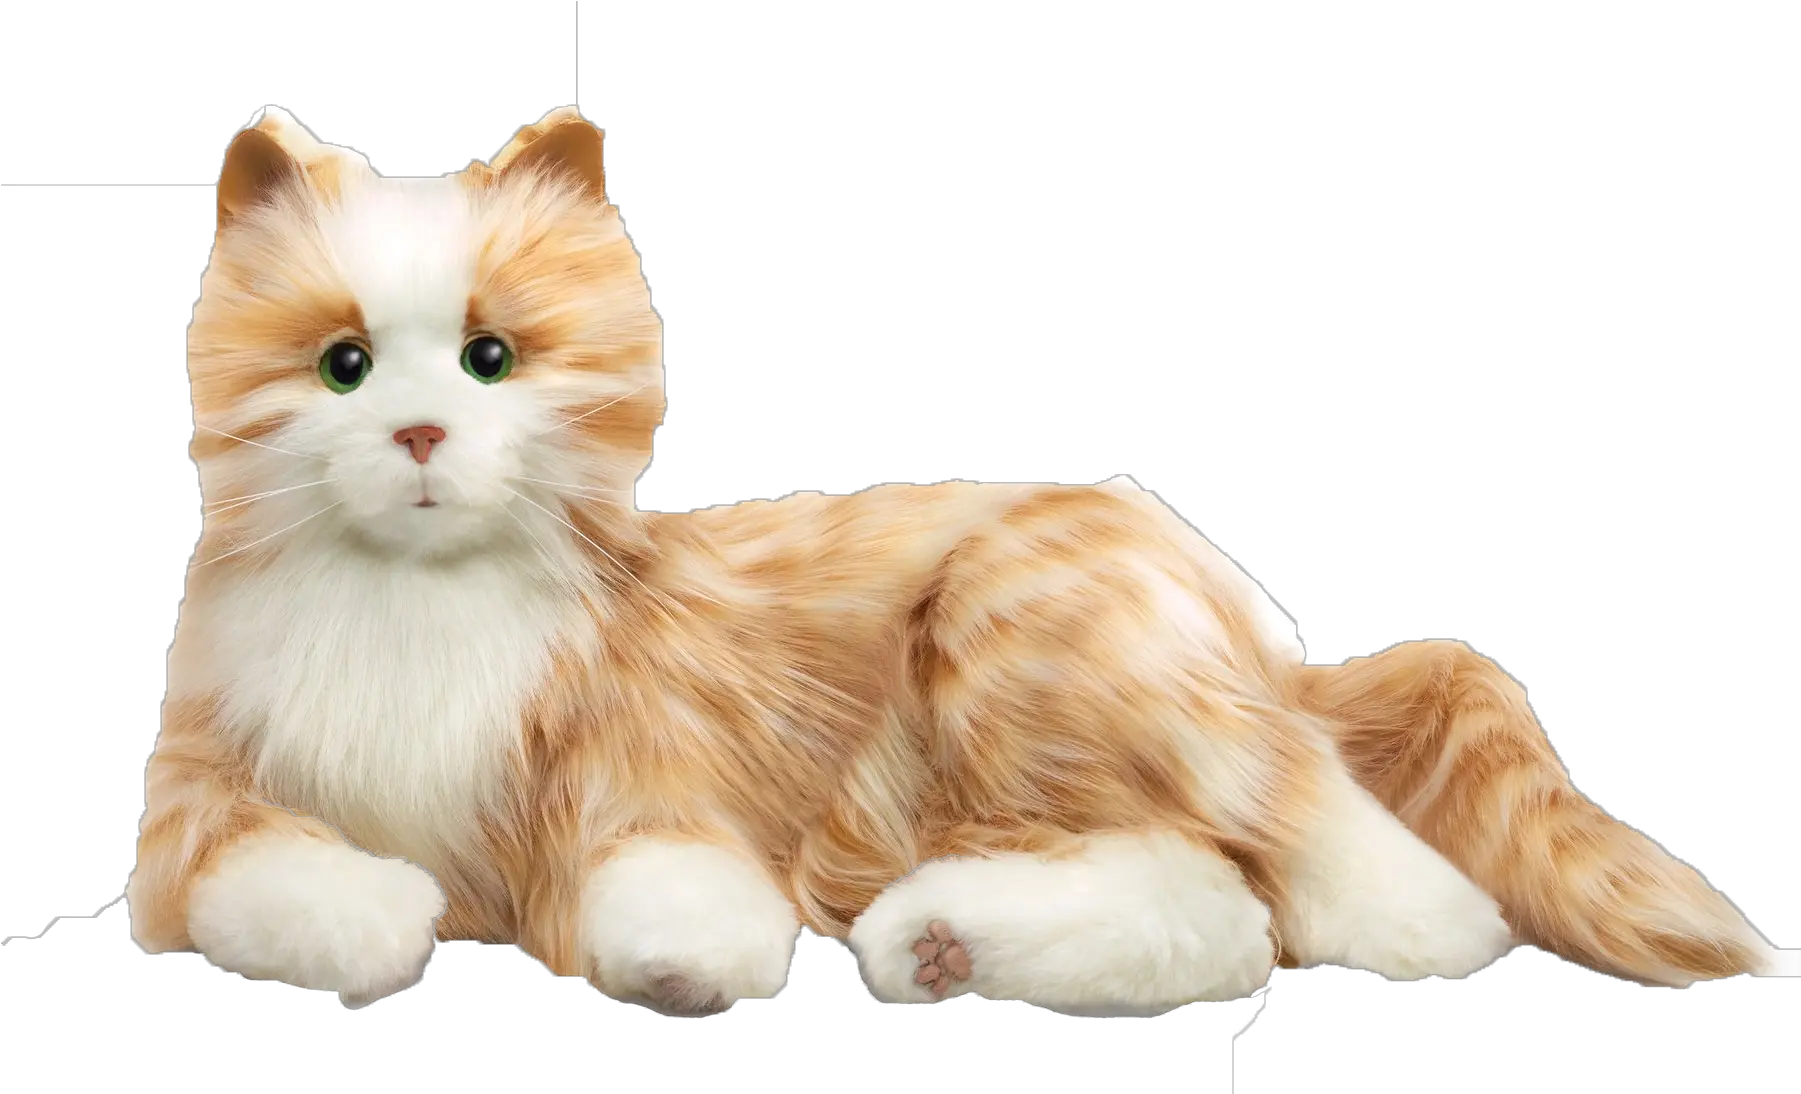 Cats Png Transparent Background